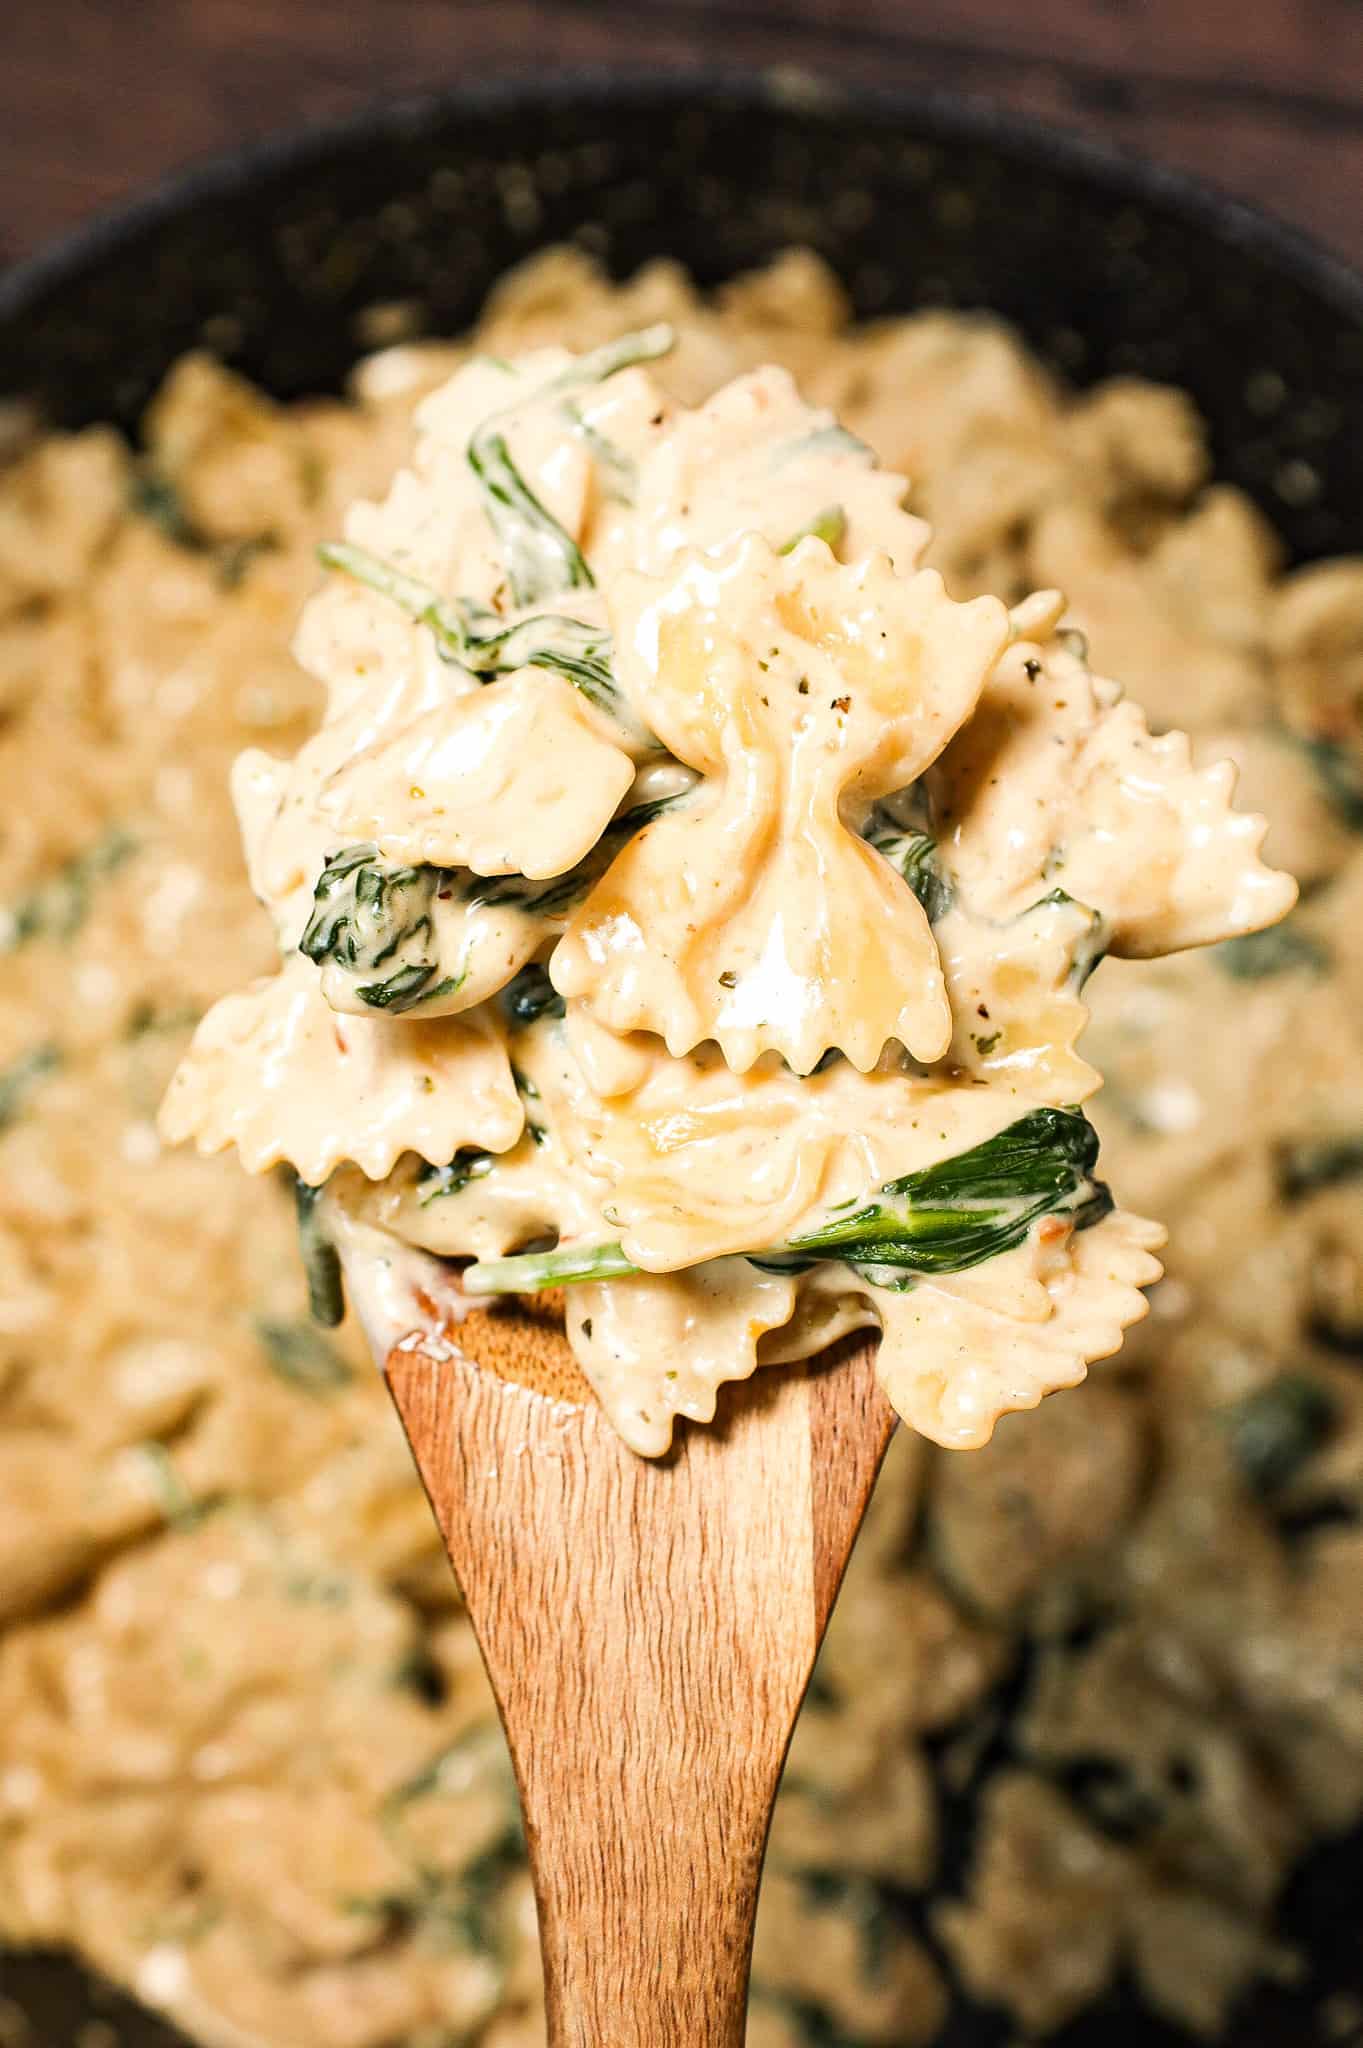 Chicken Spinach Alfredo is a creamy garlic parmesan pasta loaded with spinach and chicken breast chunks.